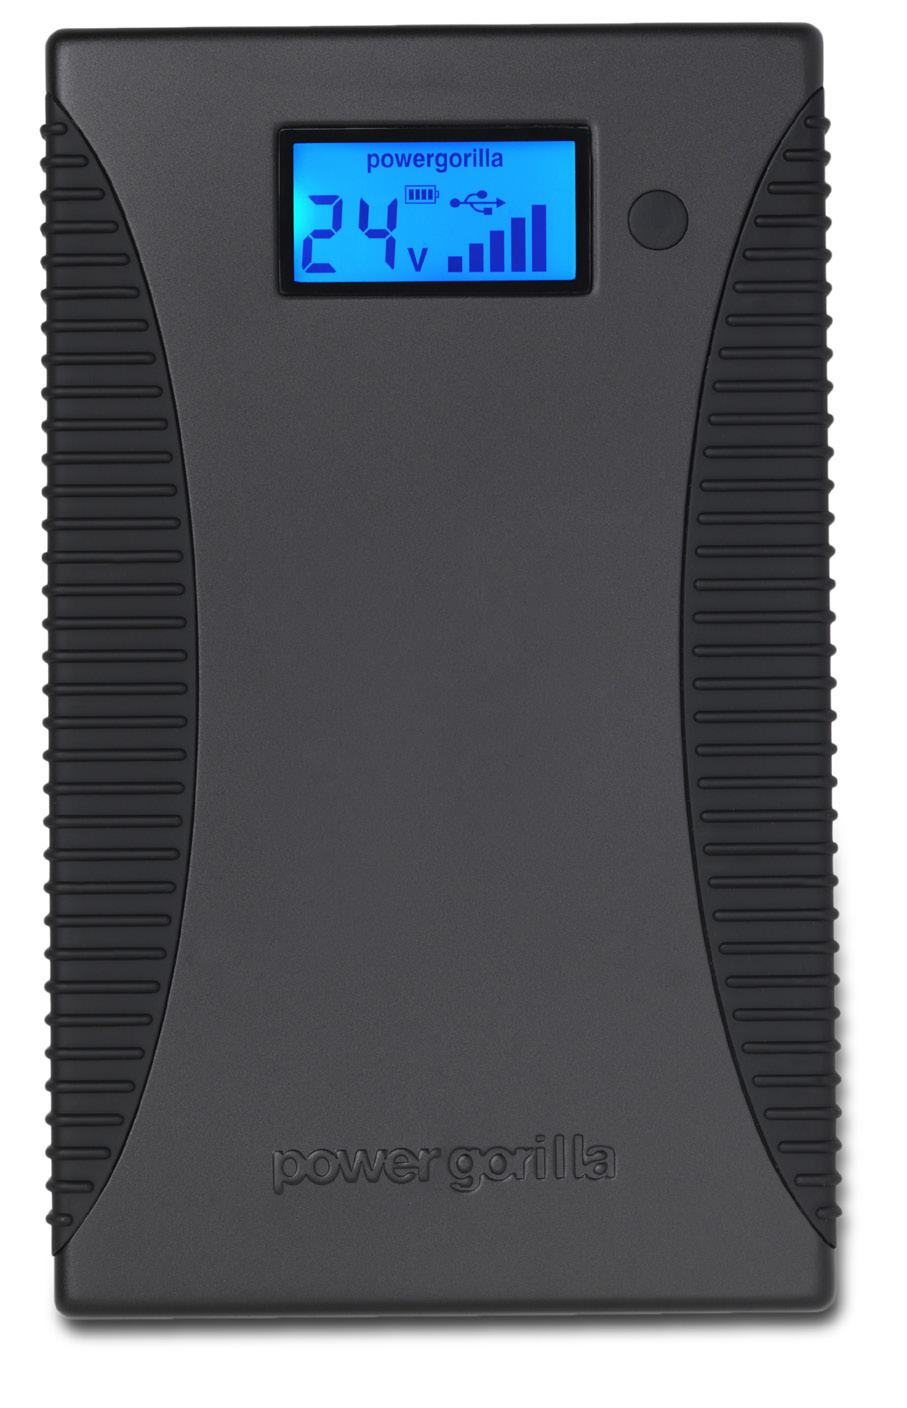 POWERGORILLA POWERGORILLA TACTICAL 5V TO 24V RUGGED HIGH TECH CHARGER USER GUIDE YOU CAN: